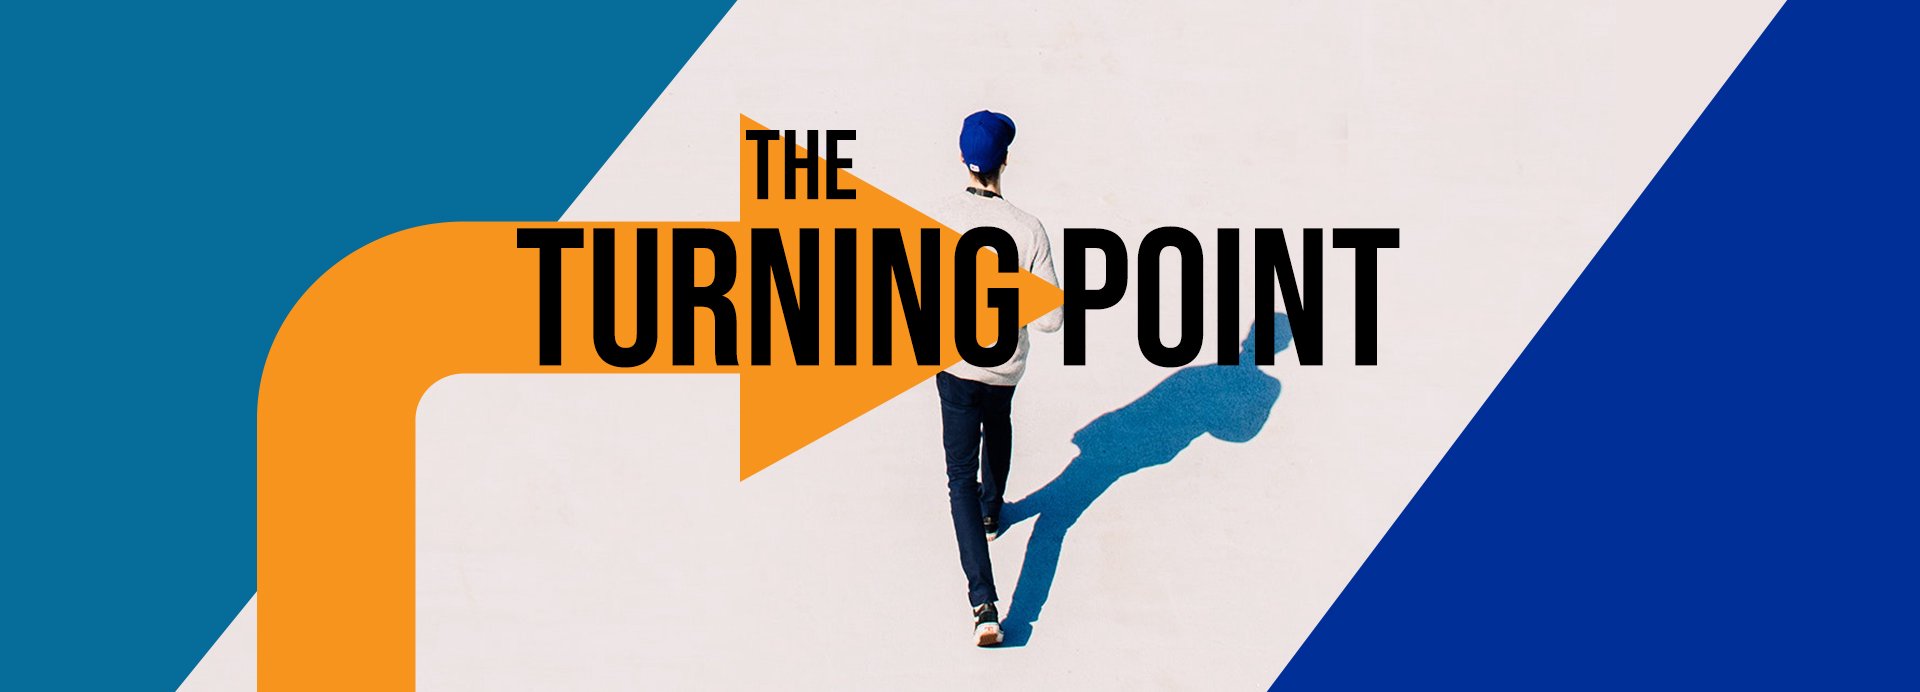 The Turning Point Thryve Church